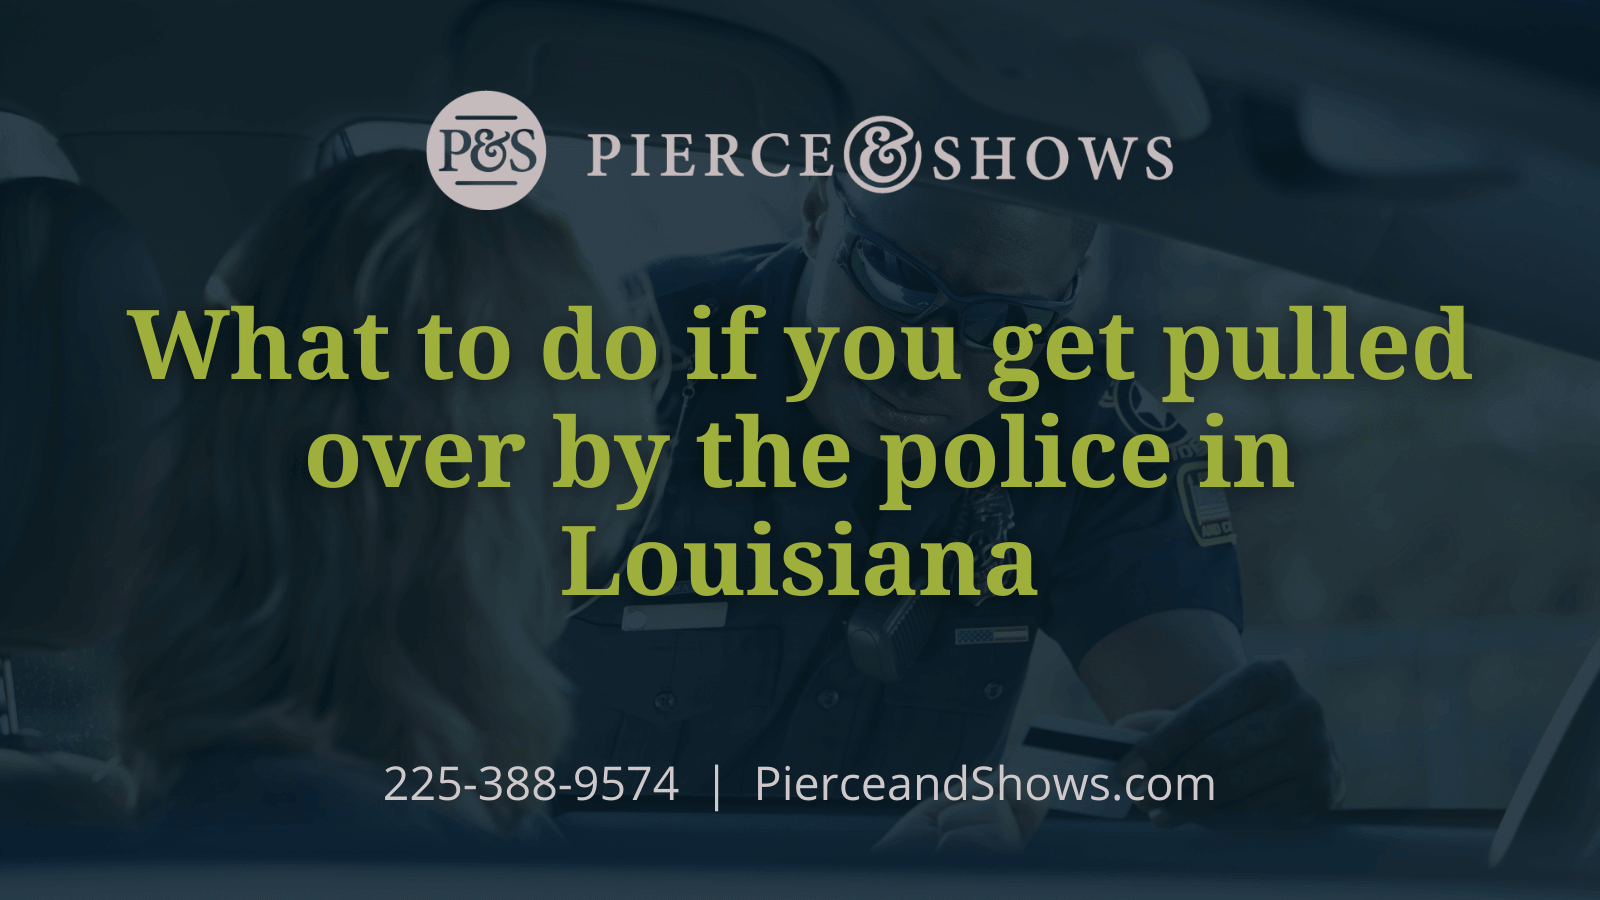 What to do if you get pulled over by the police in Louisiana - Baton Rouge Louisiana injury attorney Pierce & Shows